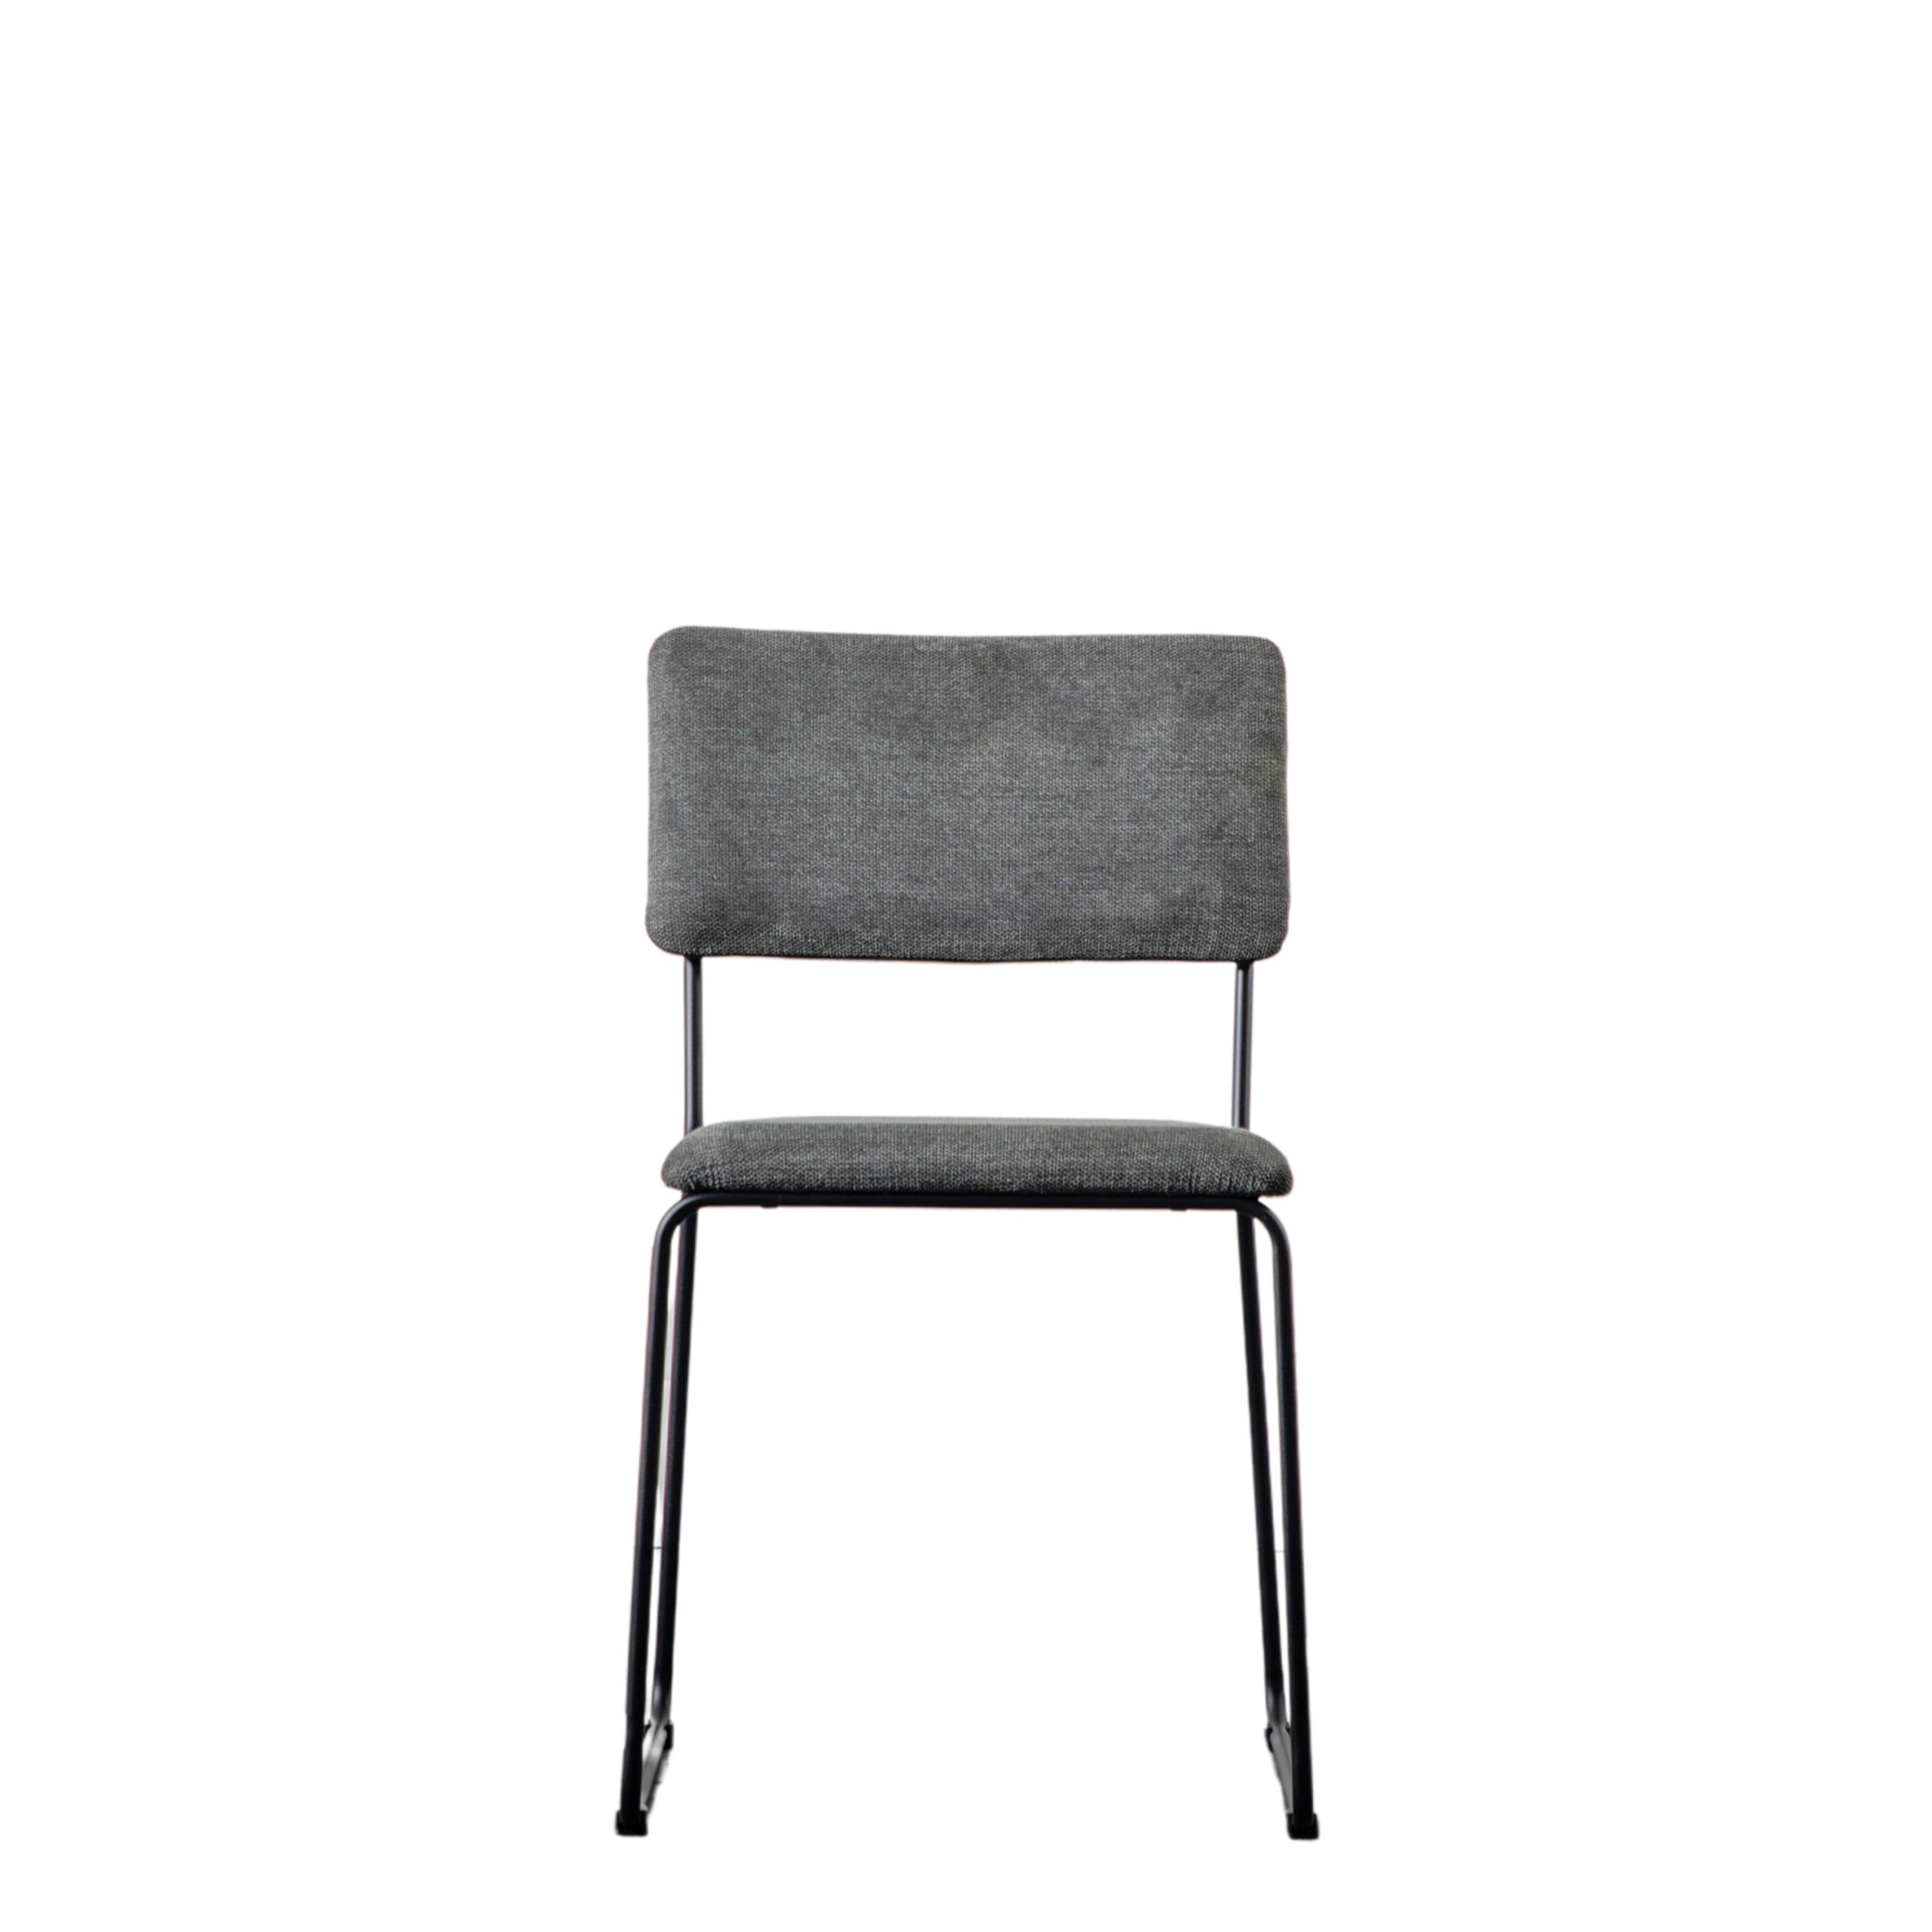 Gallery Direct Chalkwell Dining Chair Charcoal (Set of 2)